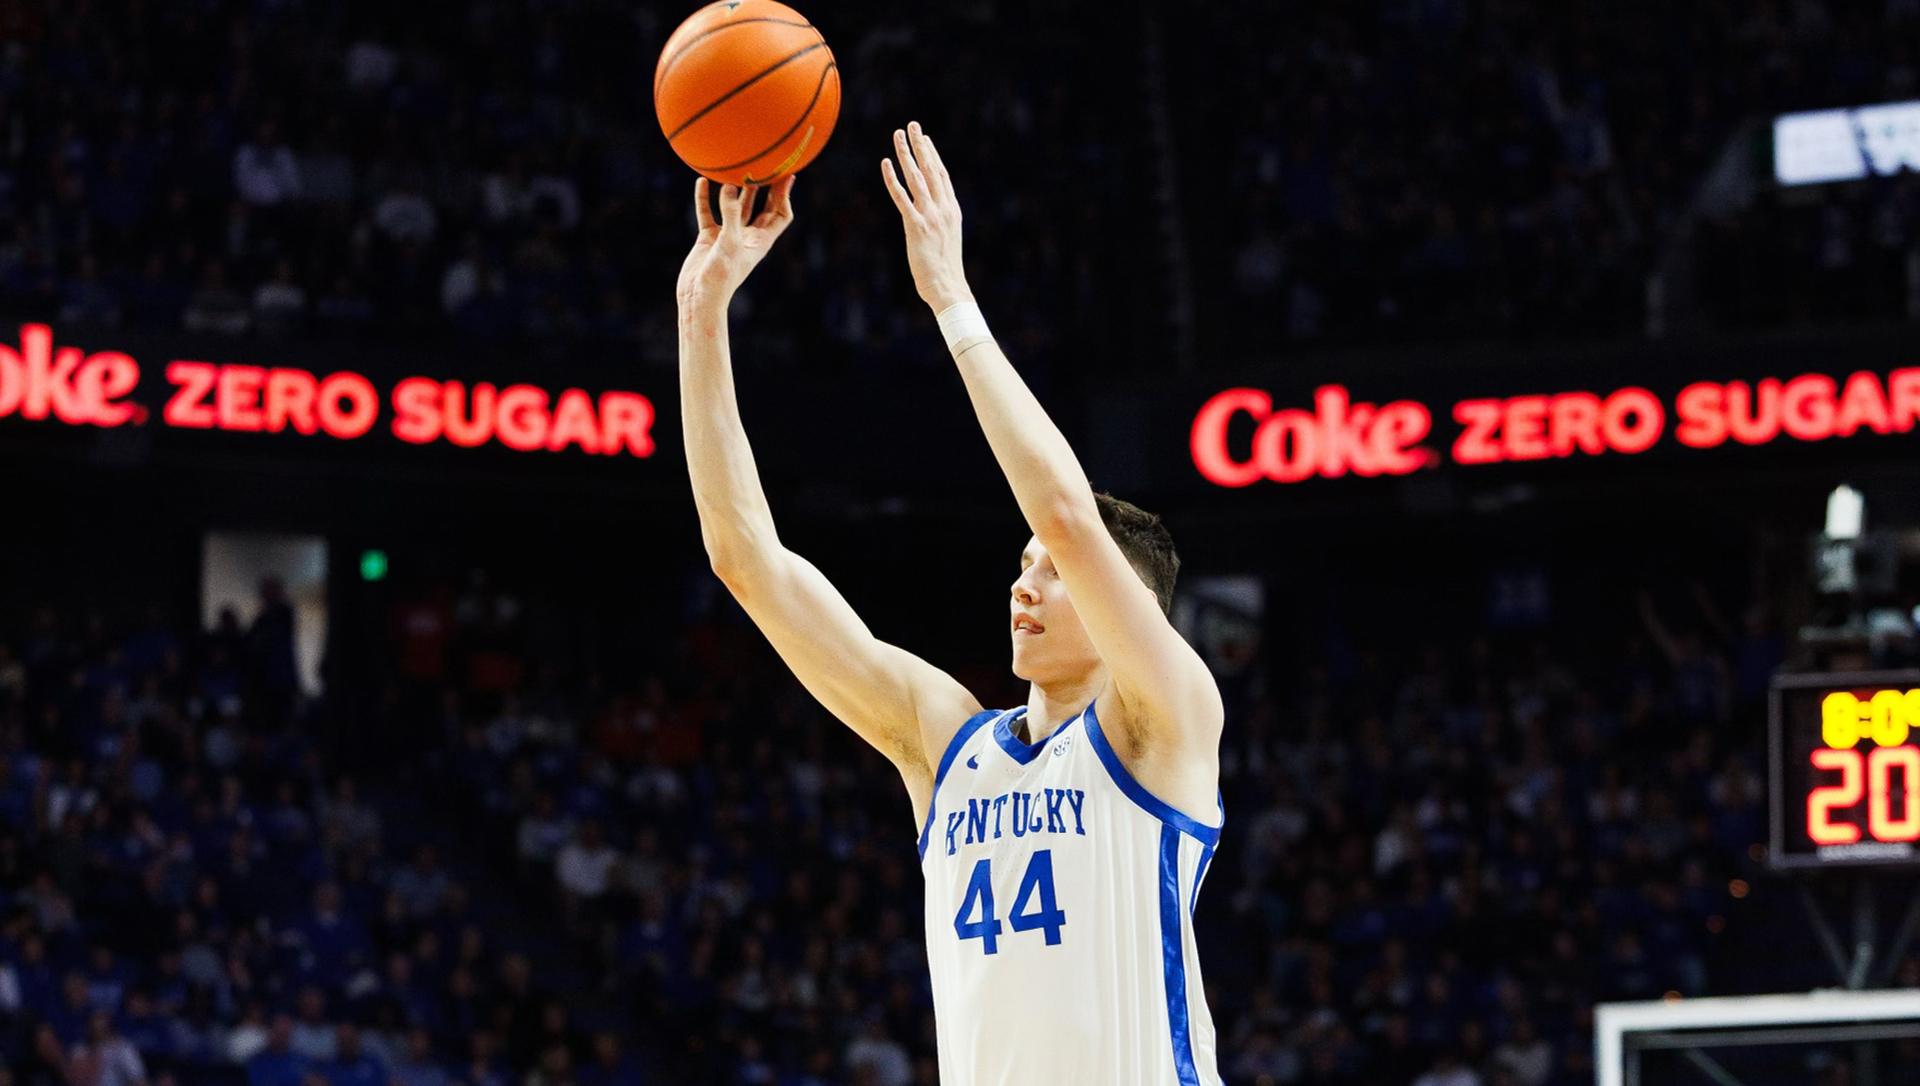 Ivisic Shines as No. 8/10 Kentucky Holds Off Georgia